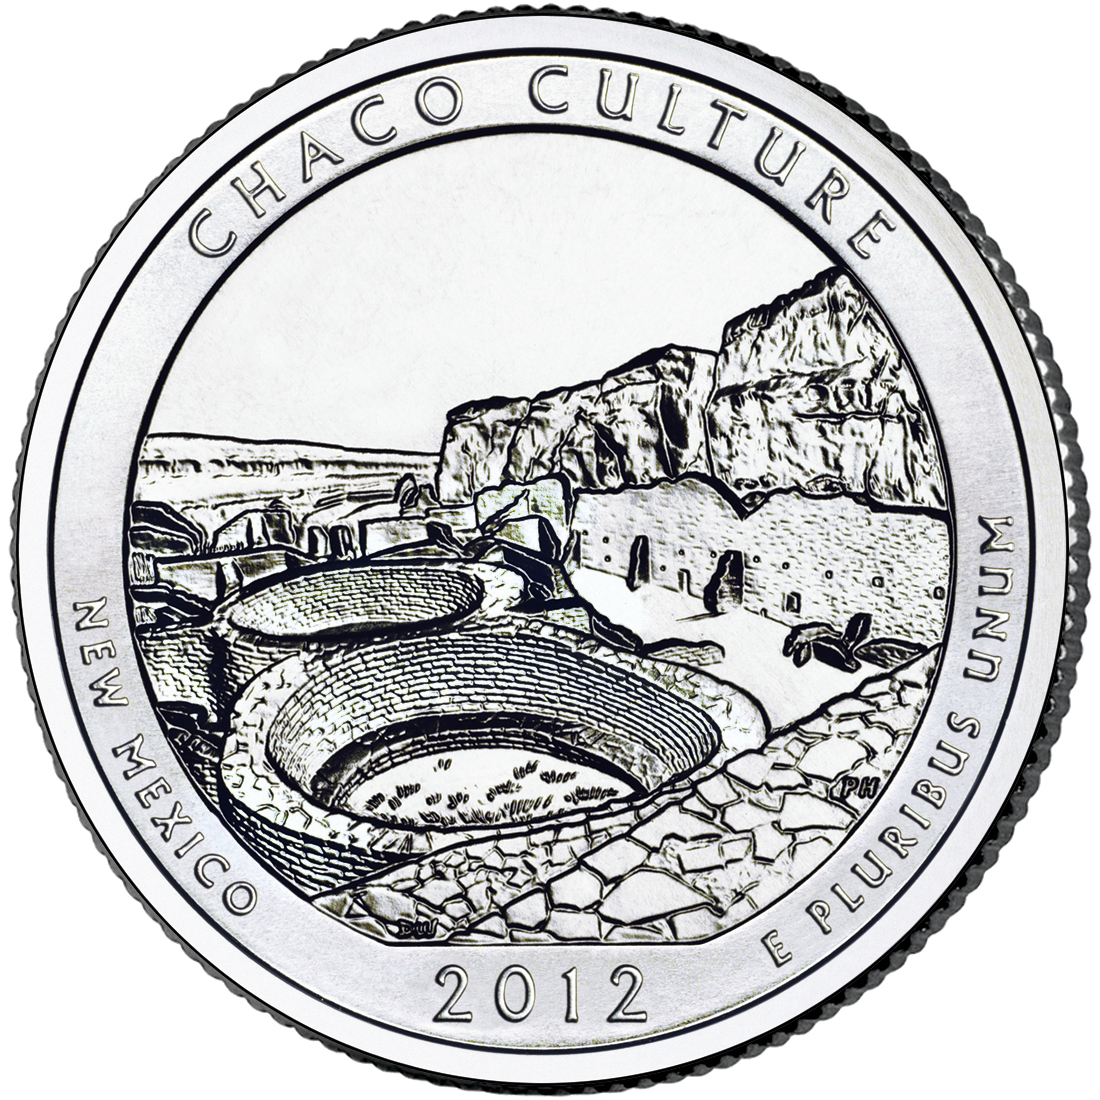 2012 Chaco Culture National Historical Park